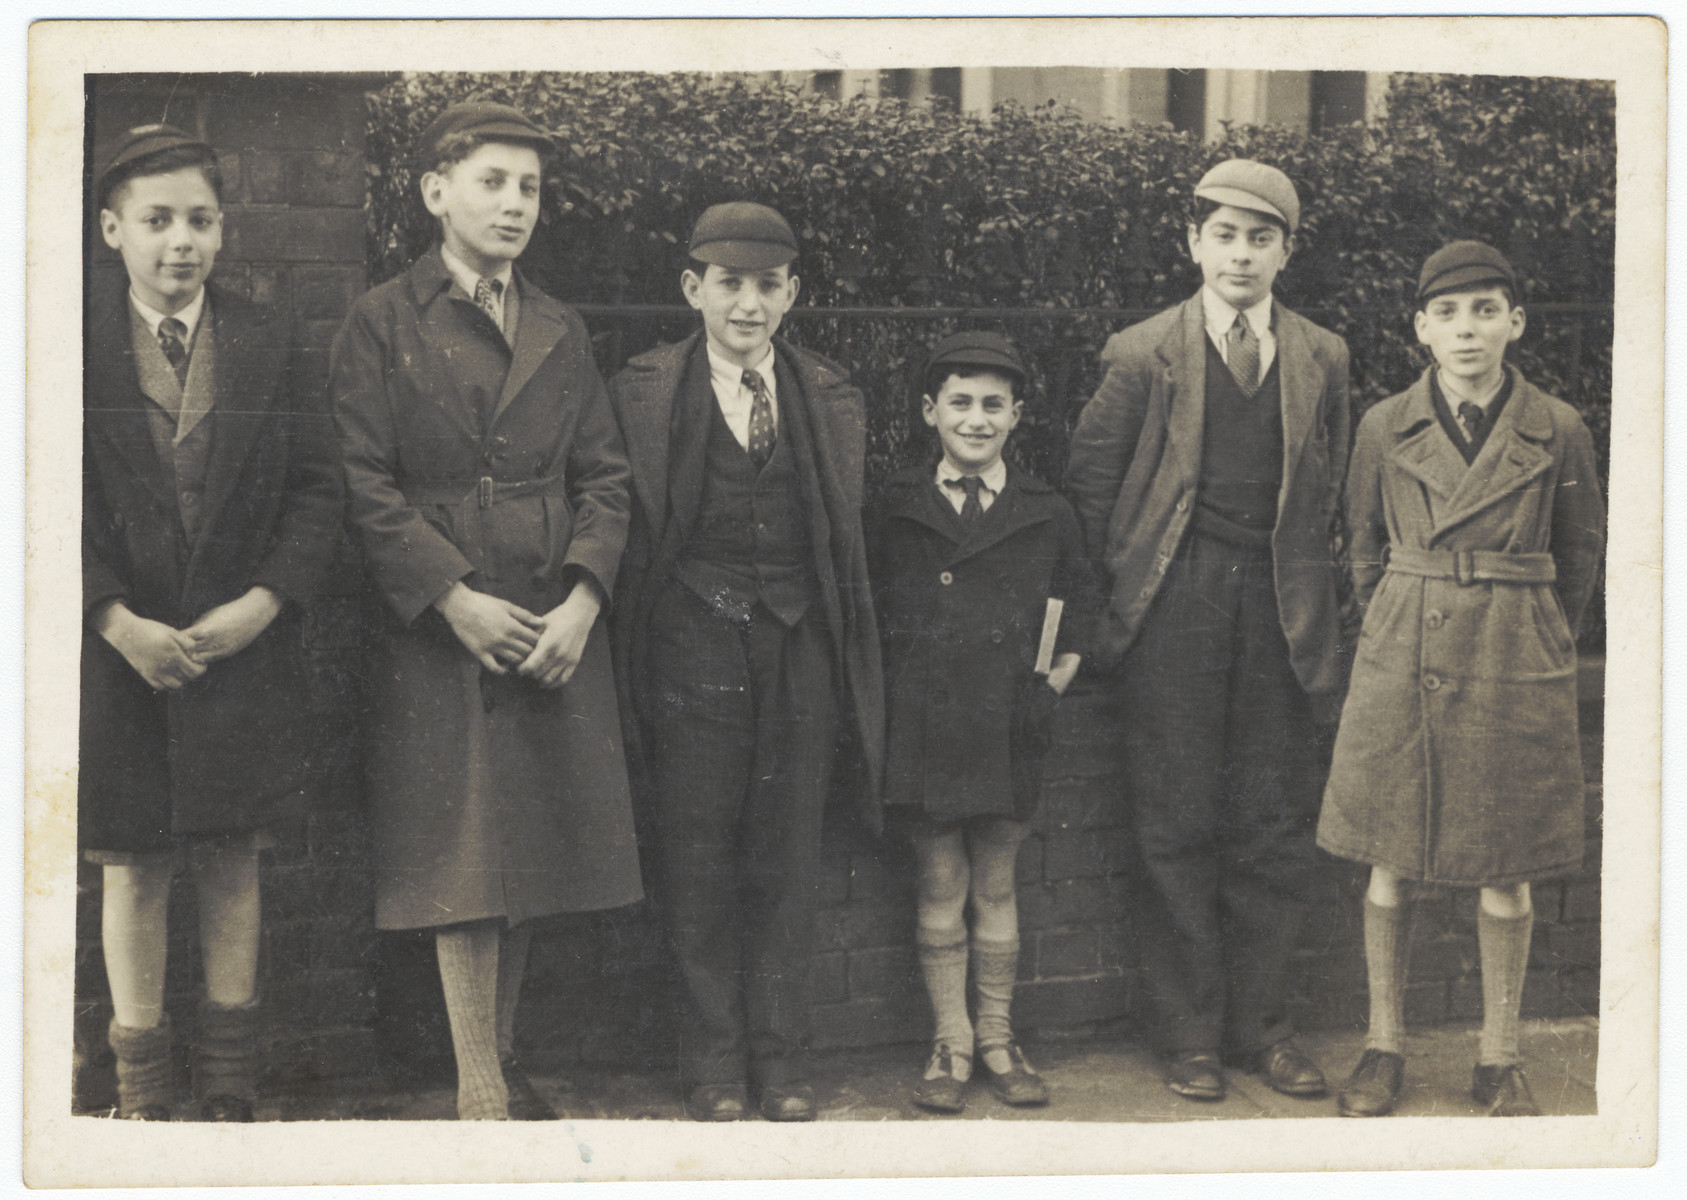 Six Jewish boys who came to England on a Kindertransport pose outside the synagogue in Nottingham.

From left to right are Martin Eiseman, Joseph Haberer, Lutz Goldner, Benjamin Bamberger, Henry Duckstein and Werner Cohn.